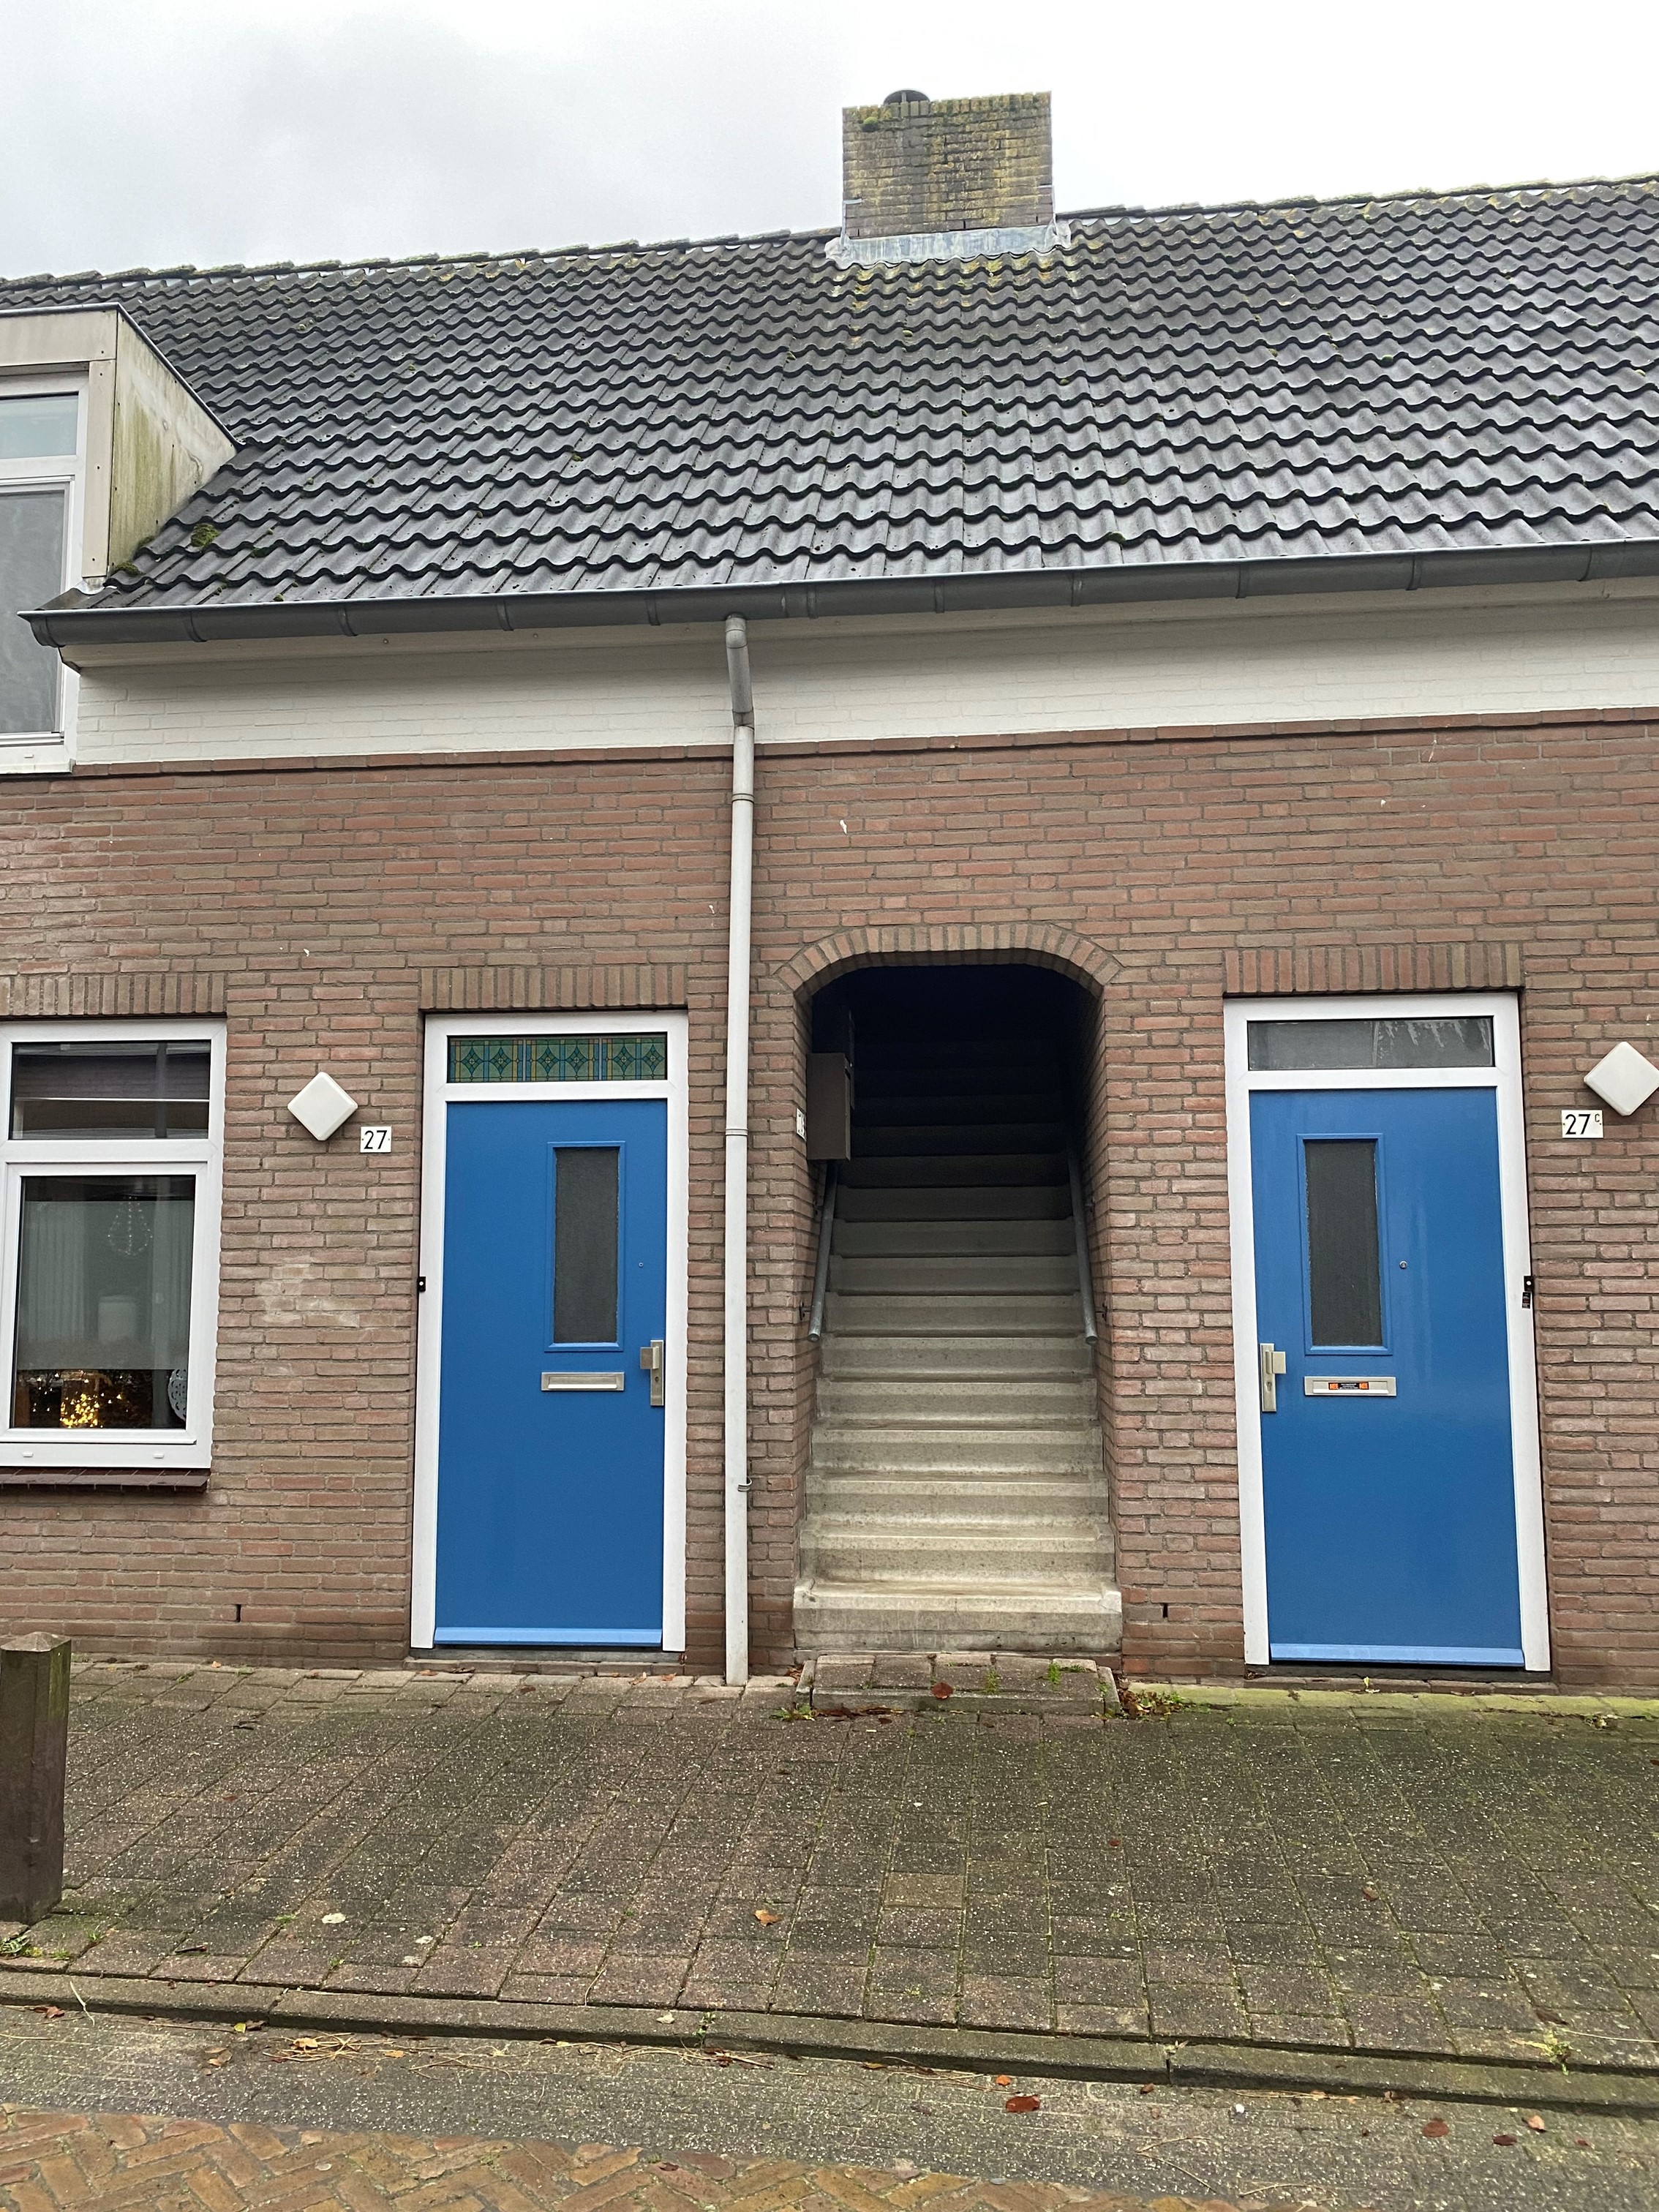 Katerstraat 27A